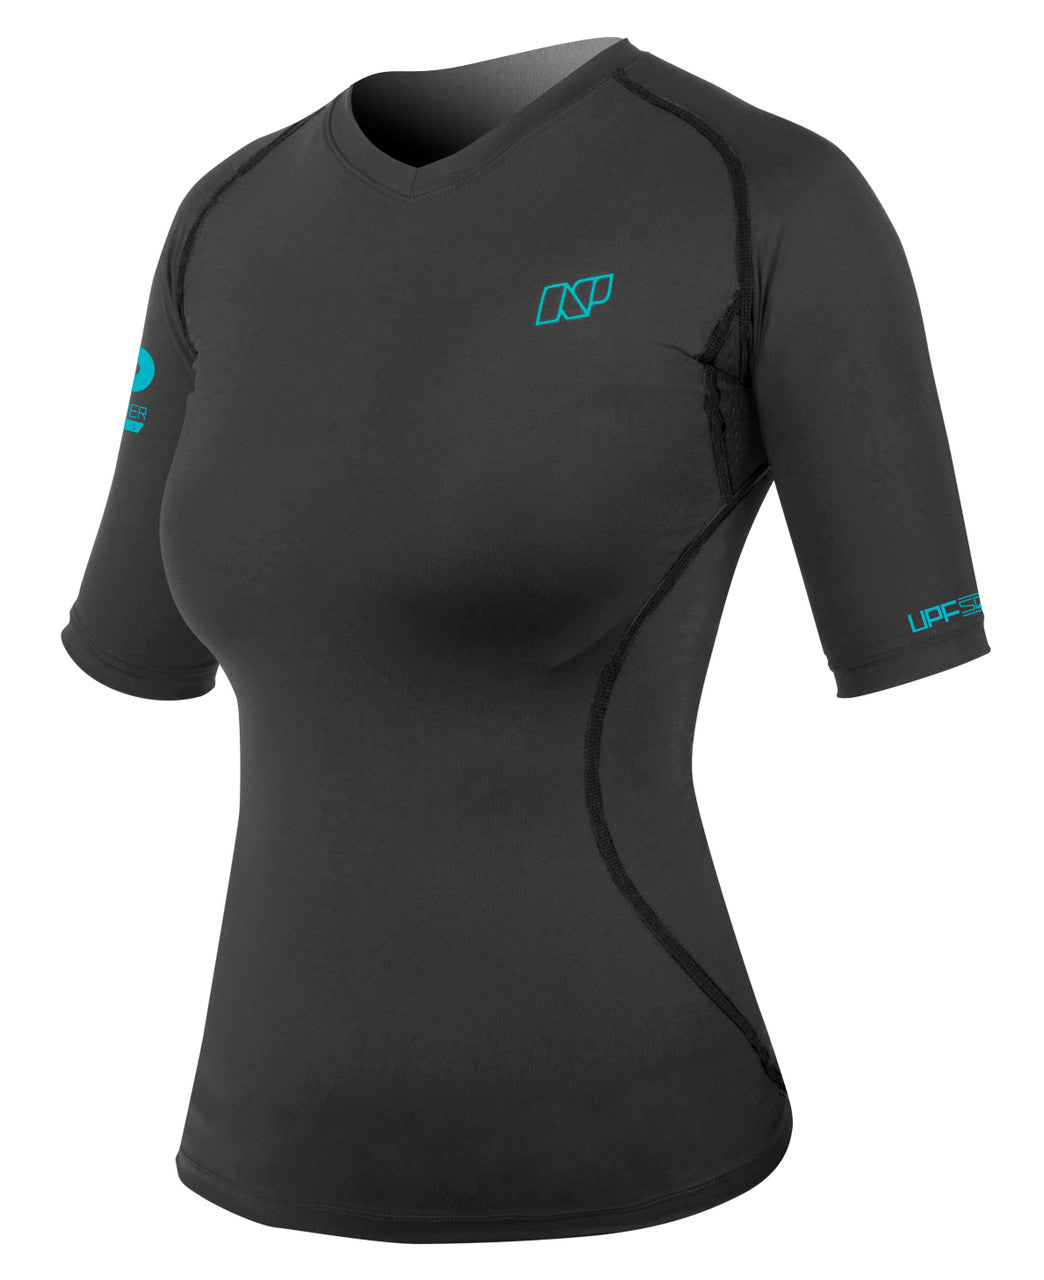 Neil Pryde Women's Compression top Short Sleeve 50% off